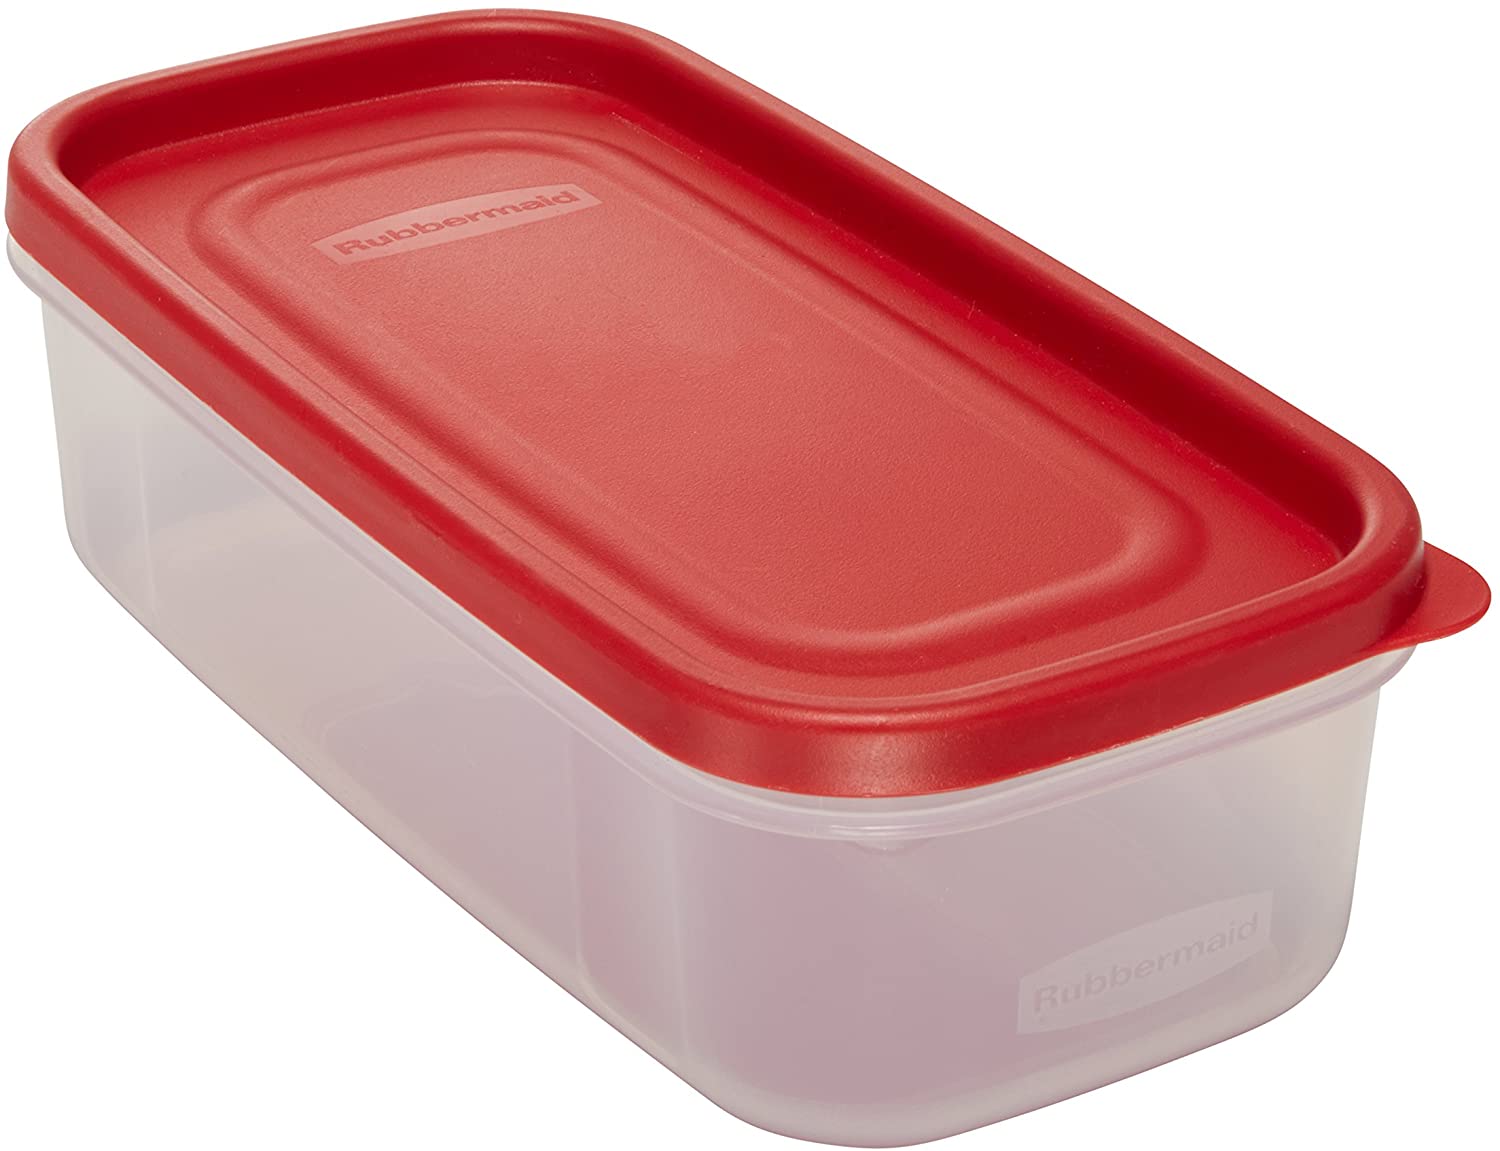 Rubbermaid Dry Food Container, Brown Sugar, 1.18 L - Whole and All